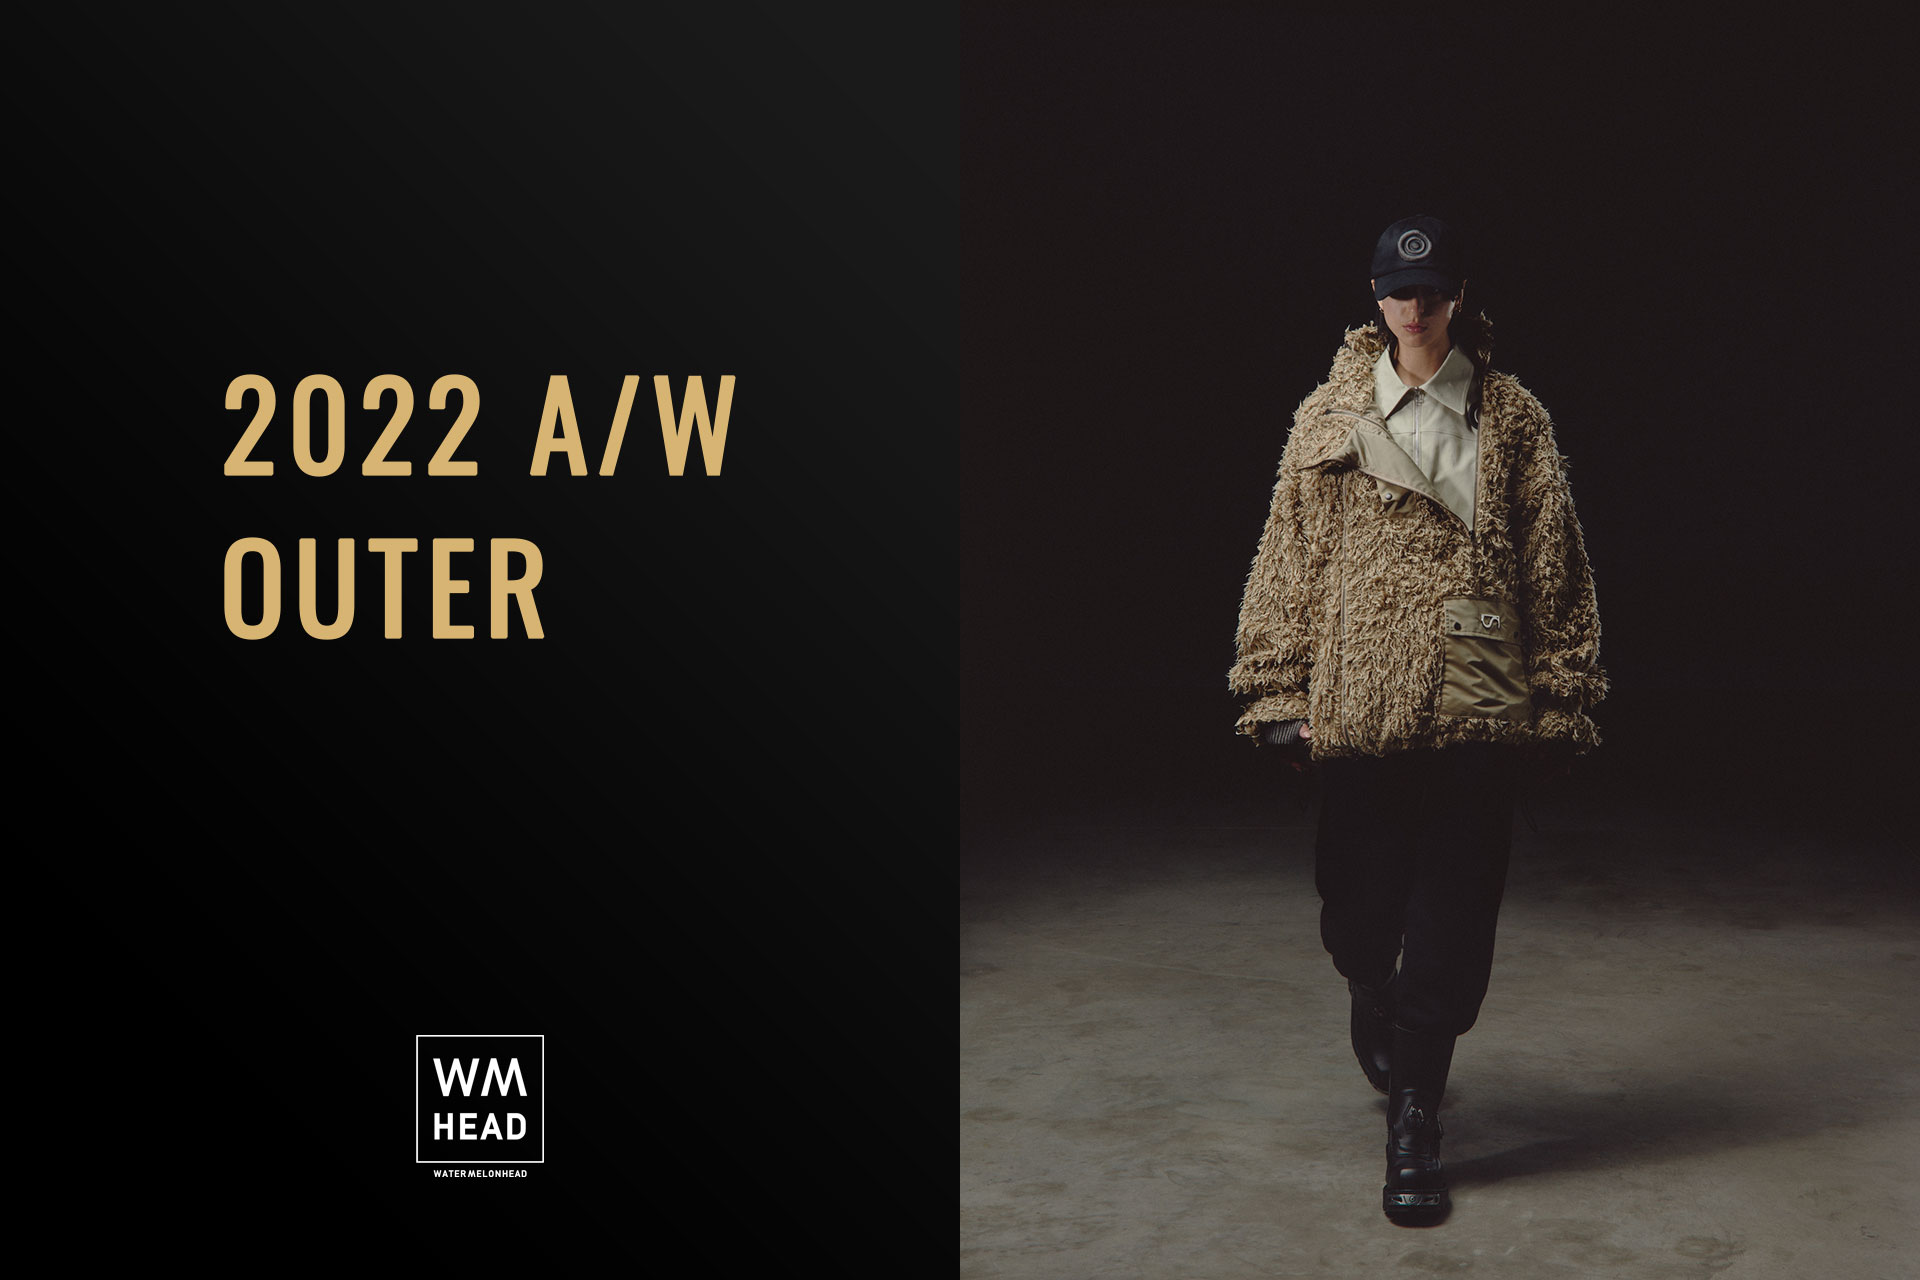 2022 A/W OUTER